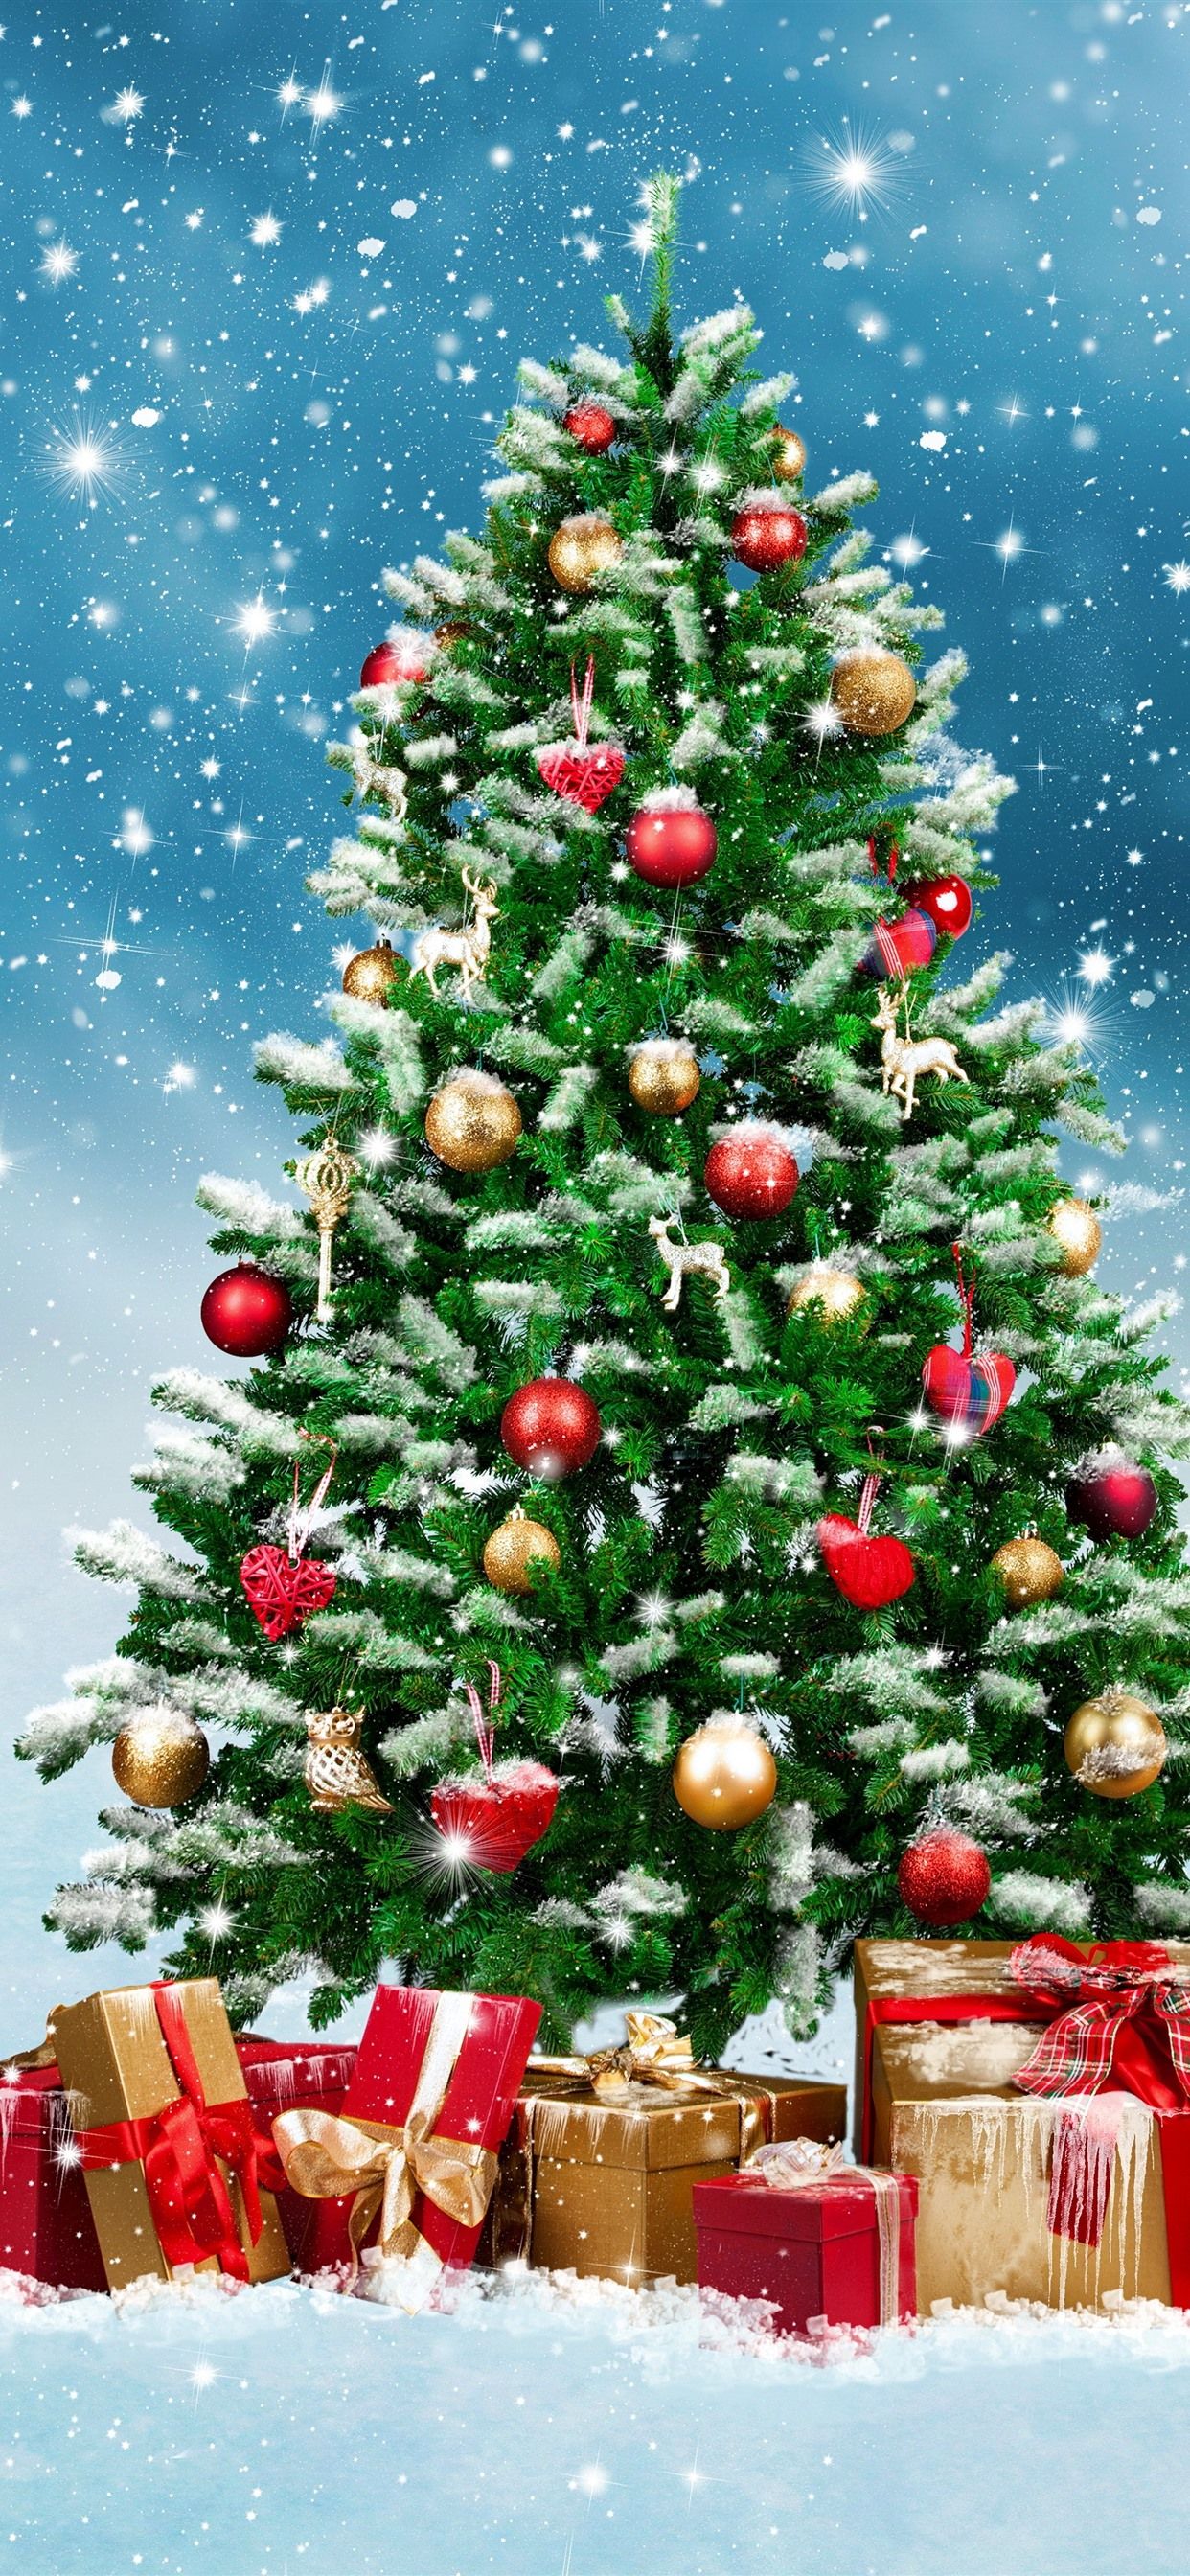 Christmas Tree, Gifts, Balls, Snowflakes, Snow, Shine 1242x2688 IPhone 11 Pro XS Max Wallpaper, Background, Picture, Image